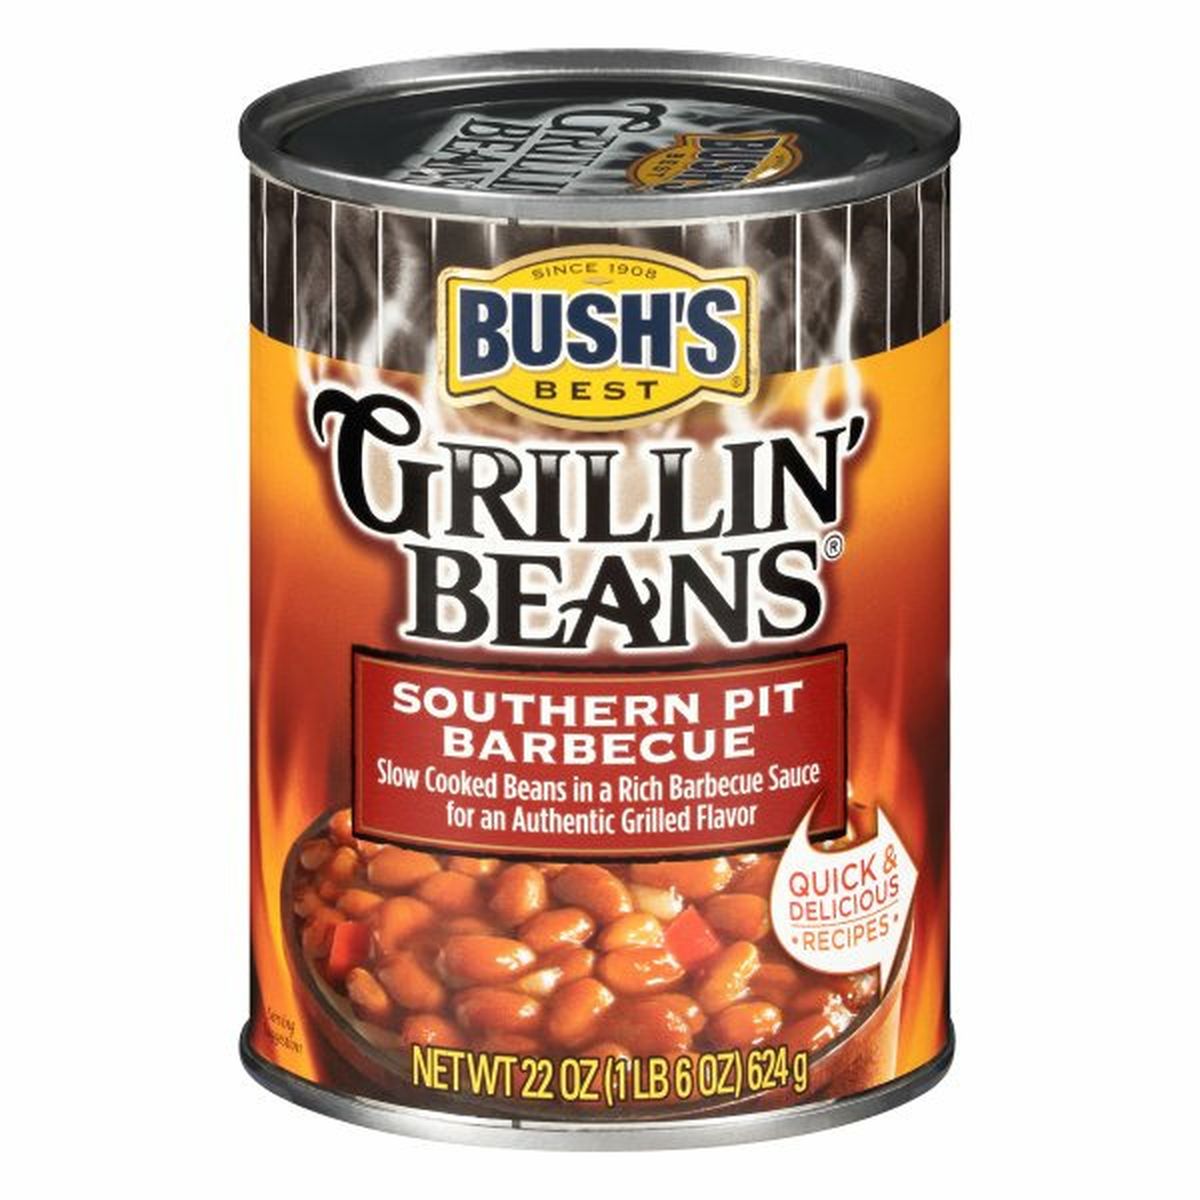 Calories in Bush's Best Grillin' Beans, Southern Pit Barbecue